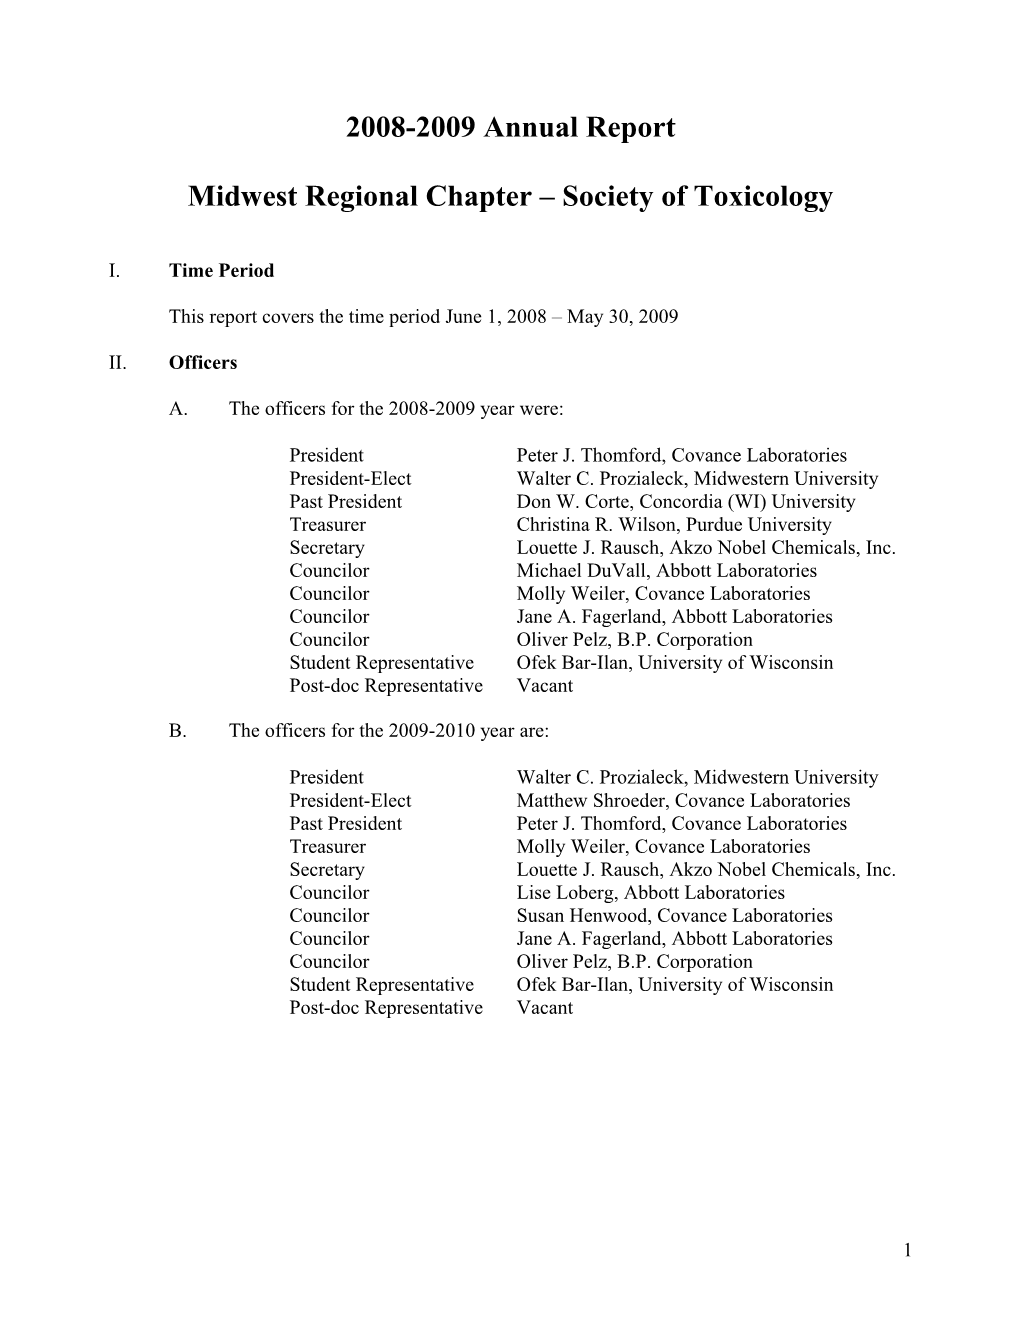 Midwest Regional Chapter Society of Toxicology